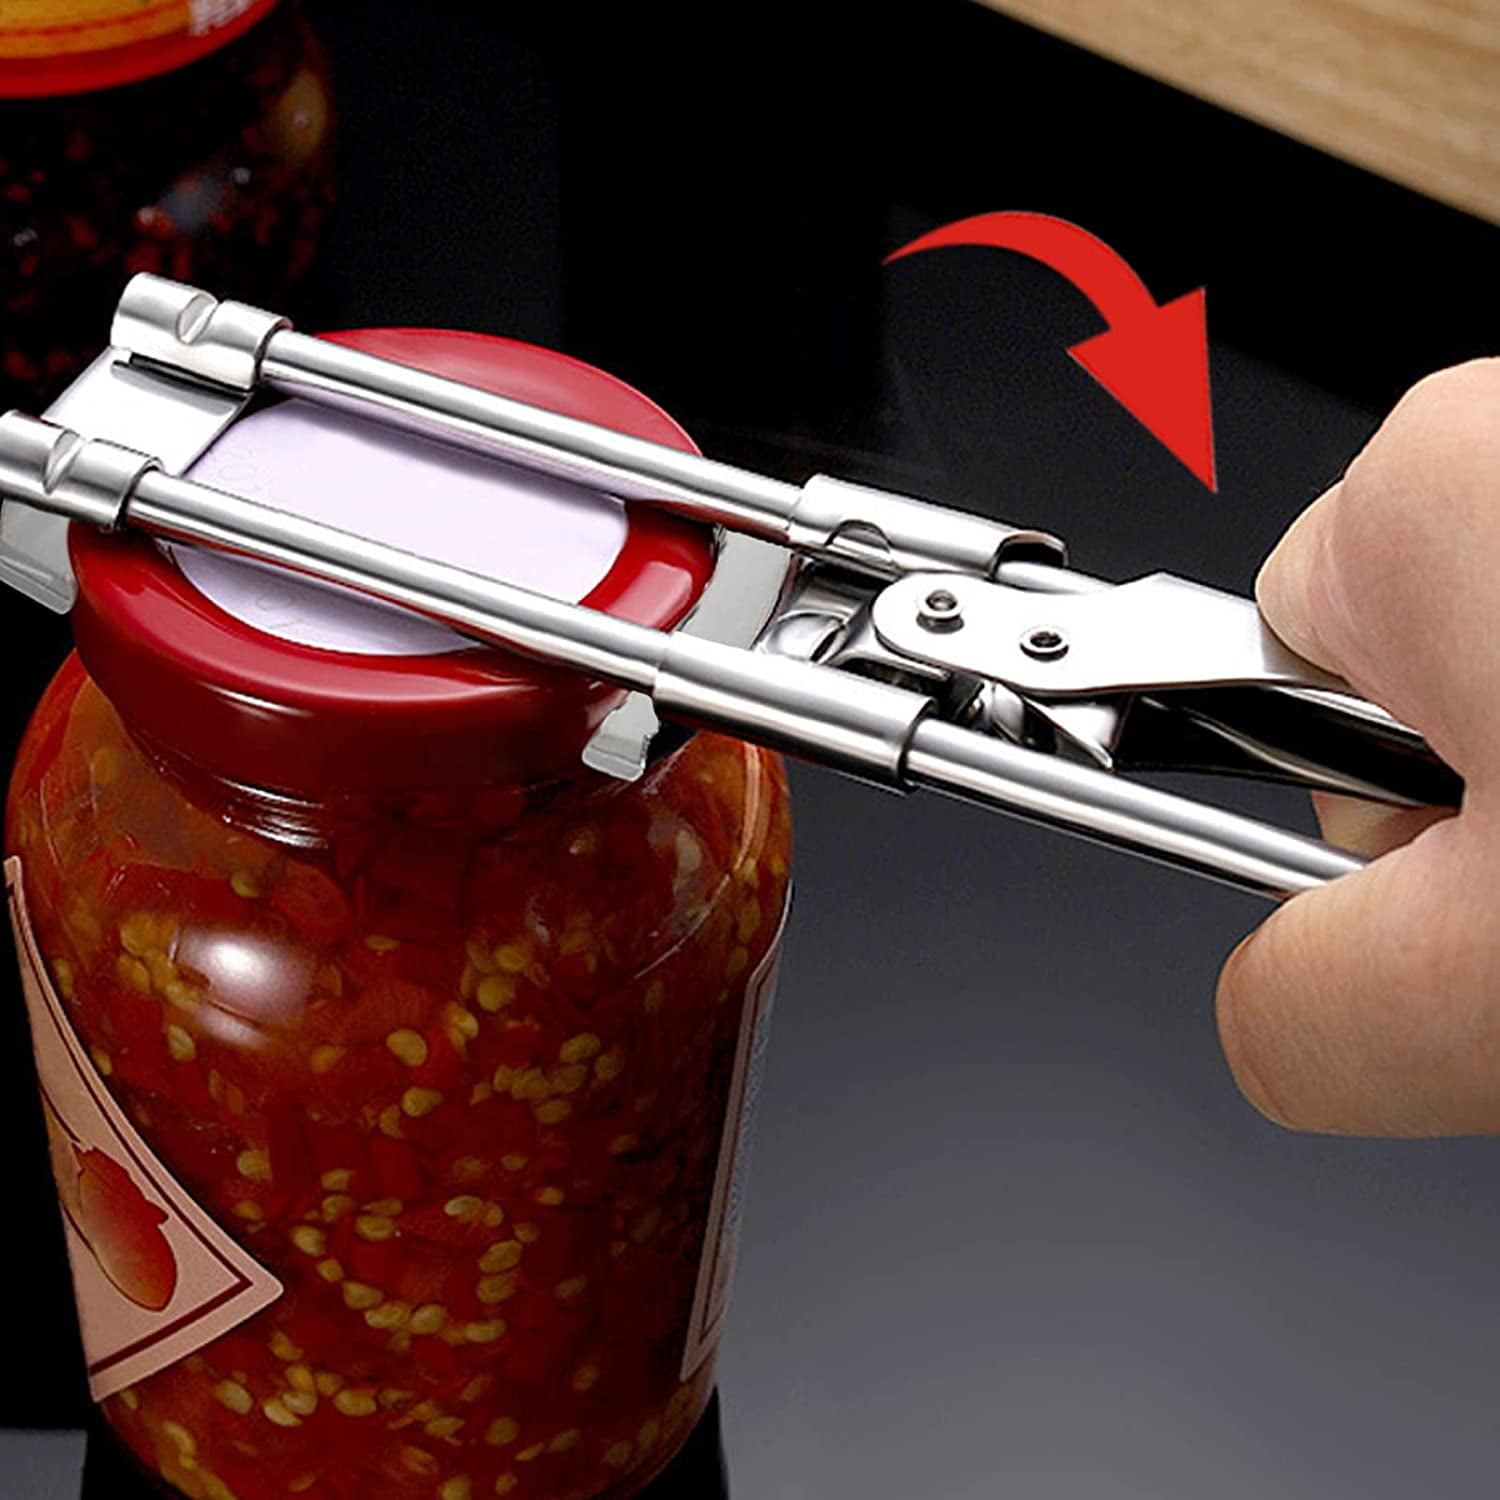 CYDW Mason Jar Opener Tool with No Lid Dents or Damage, Can Opener Manual  Multi-Purpose, Easy Twist Manual Handheld Top Remover Utensil, Canning